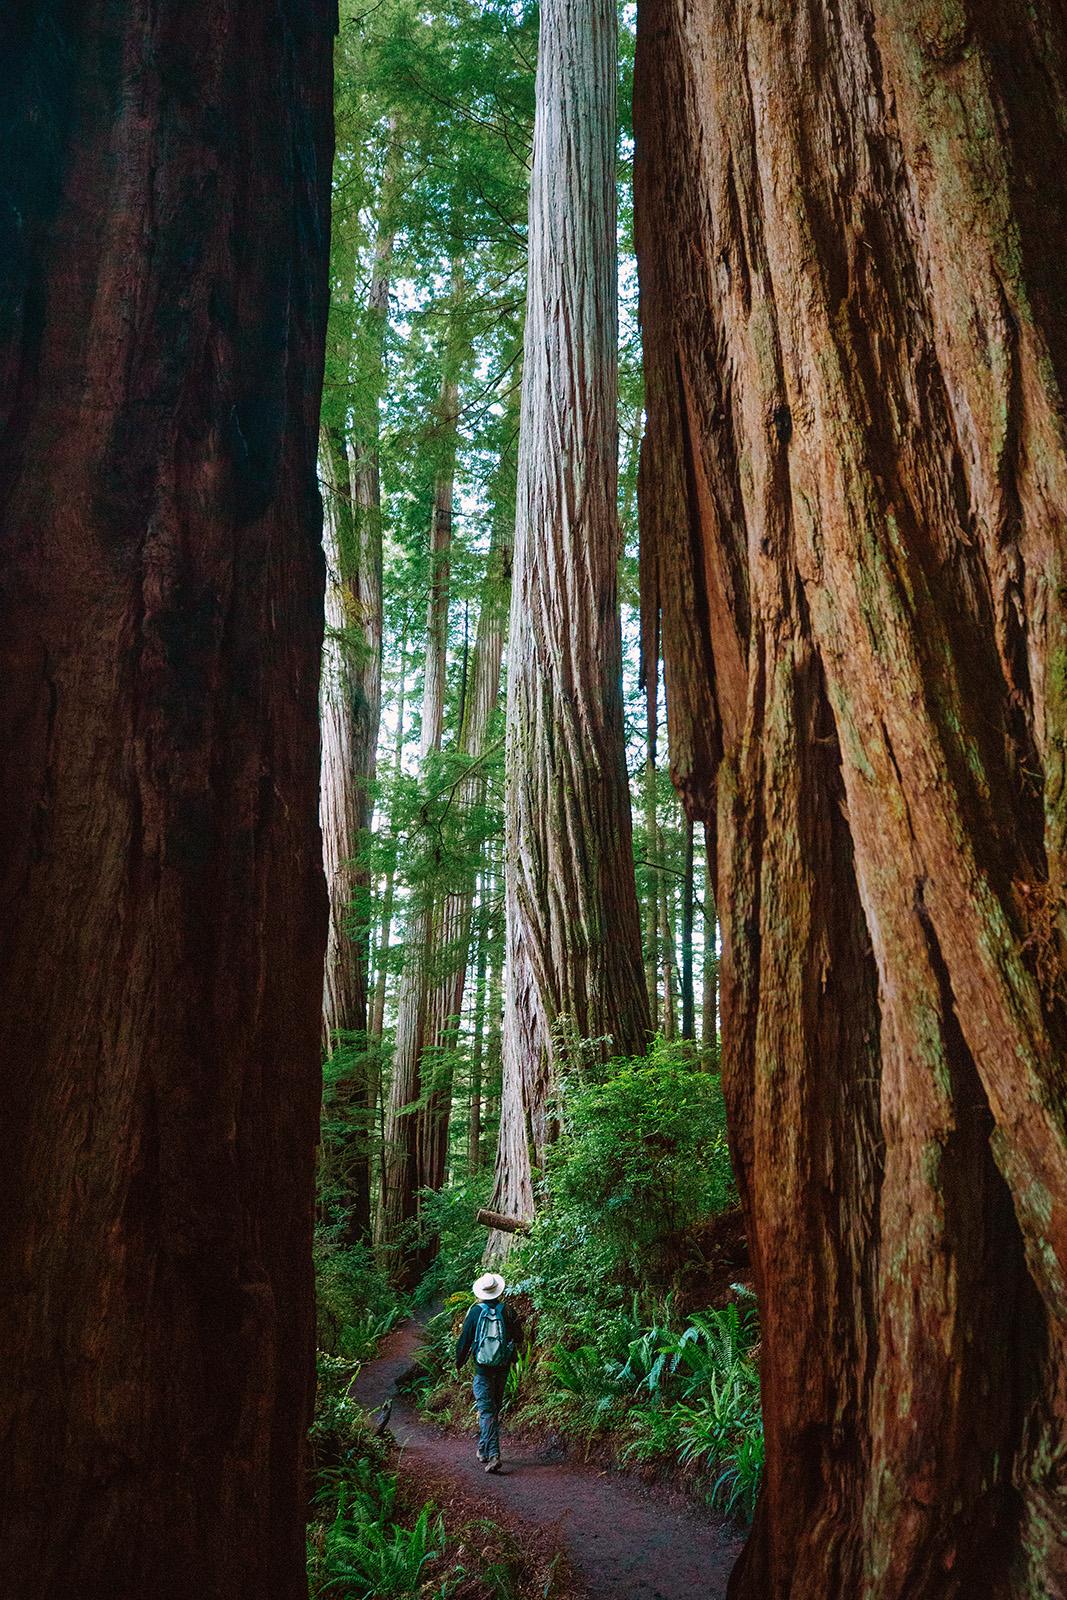 Mill Creek Trail leads to the Grove of Titans in Jedediah Smith Redwoods State Park in Crescent City, California. (Myung J. Chun/Los Angeles Times/TNS)